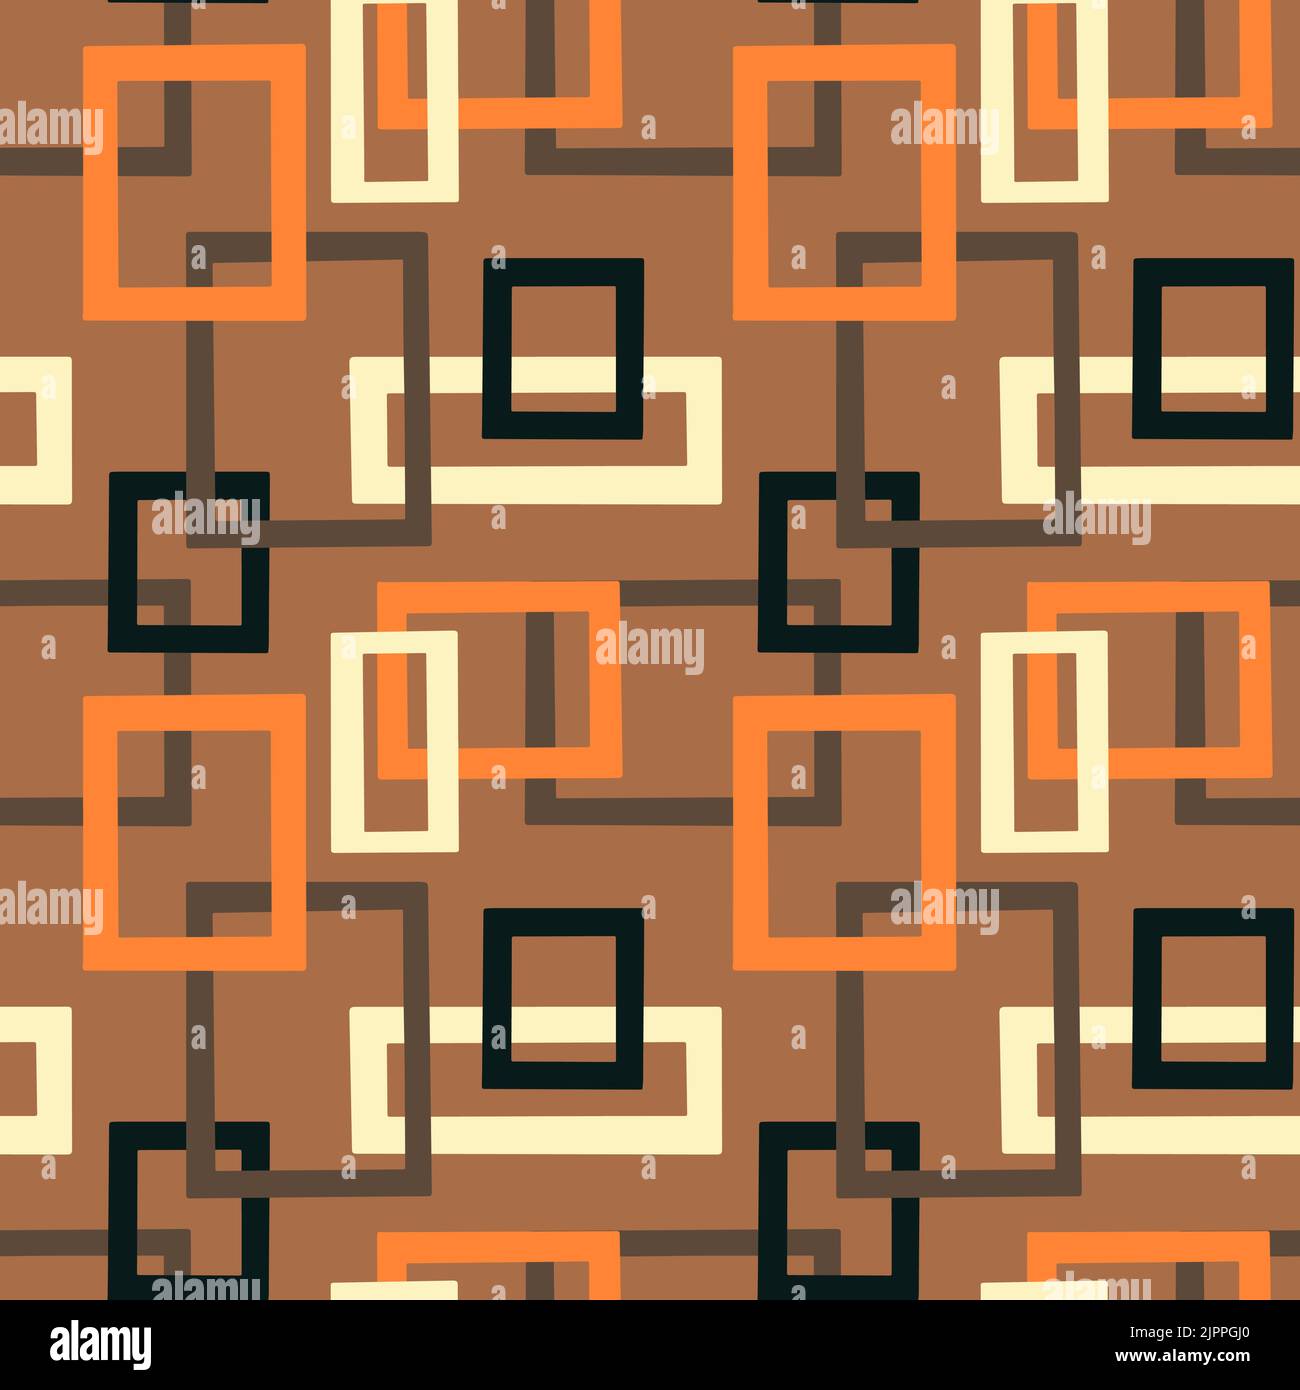 Background different colors separated squares Vector Image